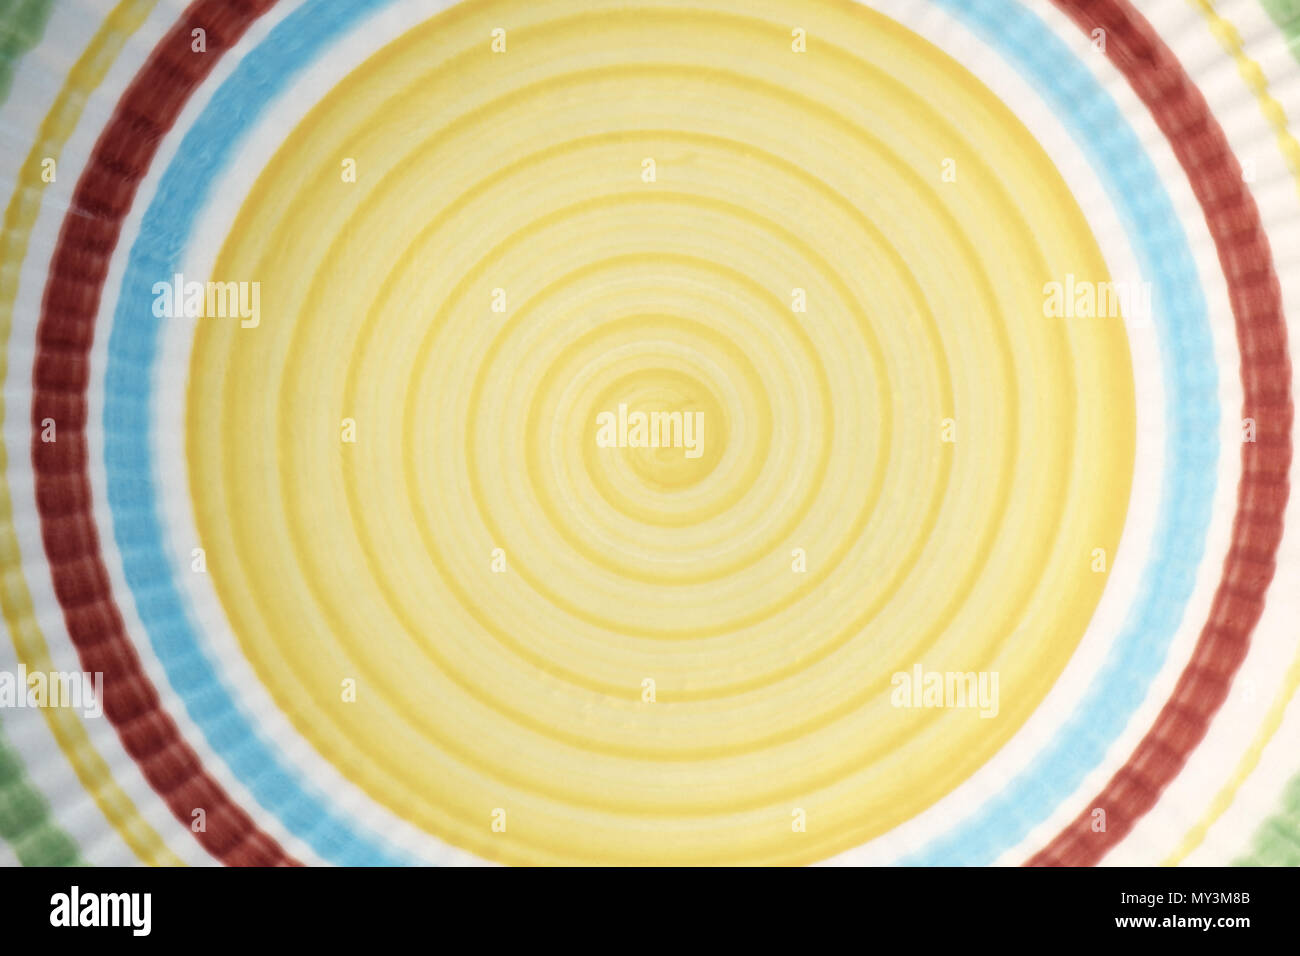 Abstract blur background of colorful ceramic dish. Stock Photo